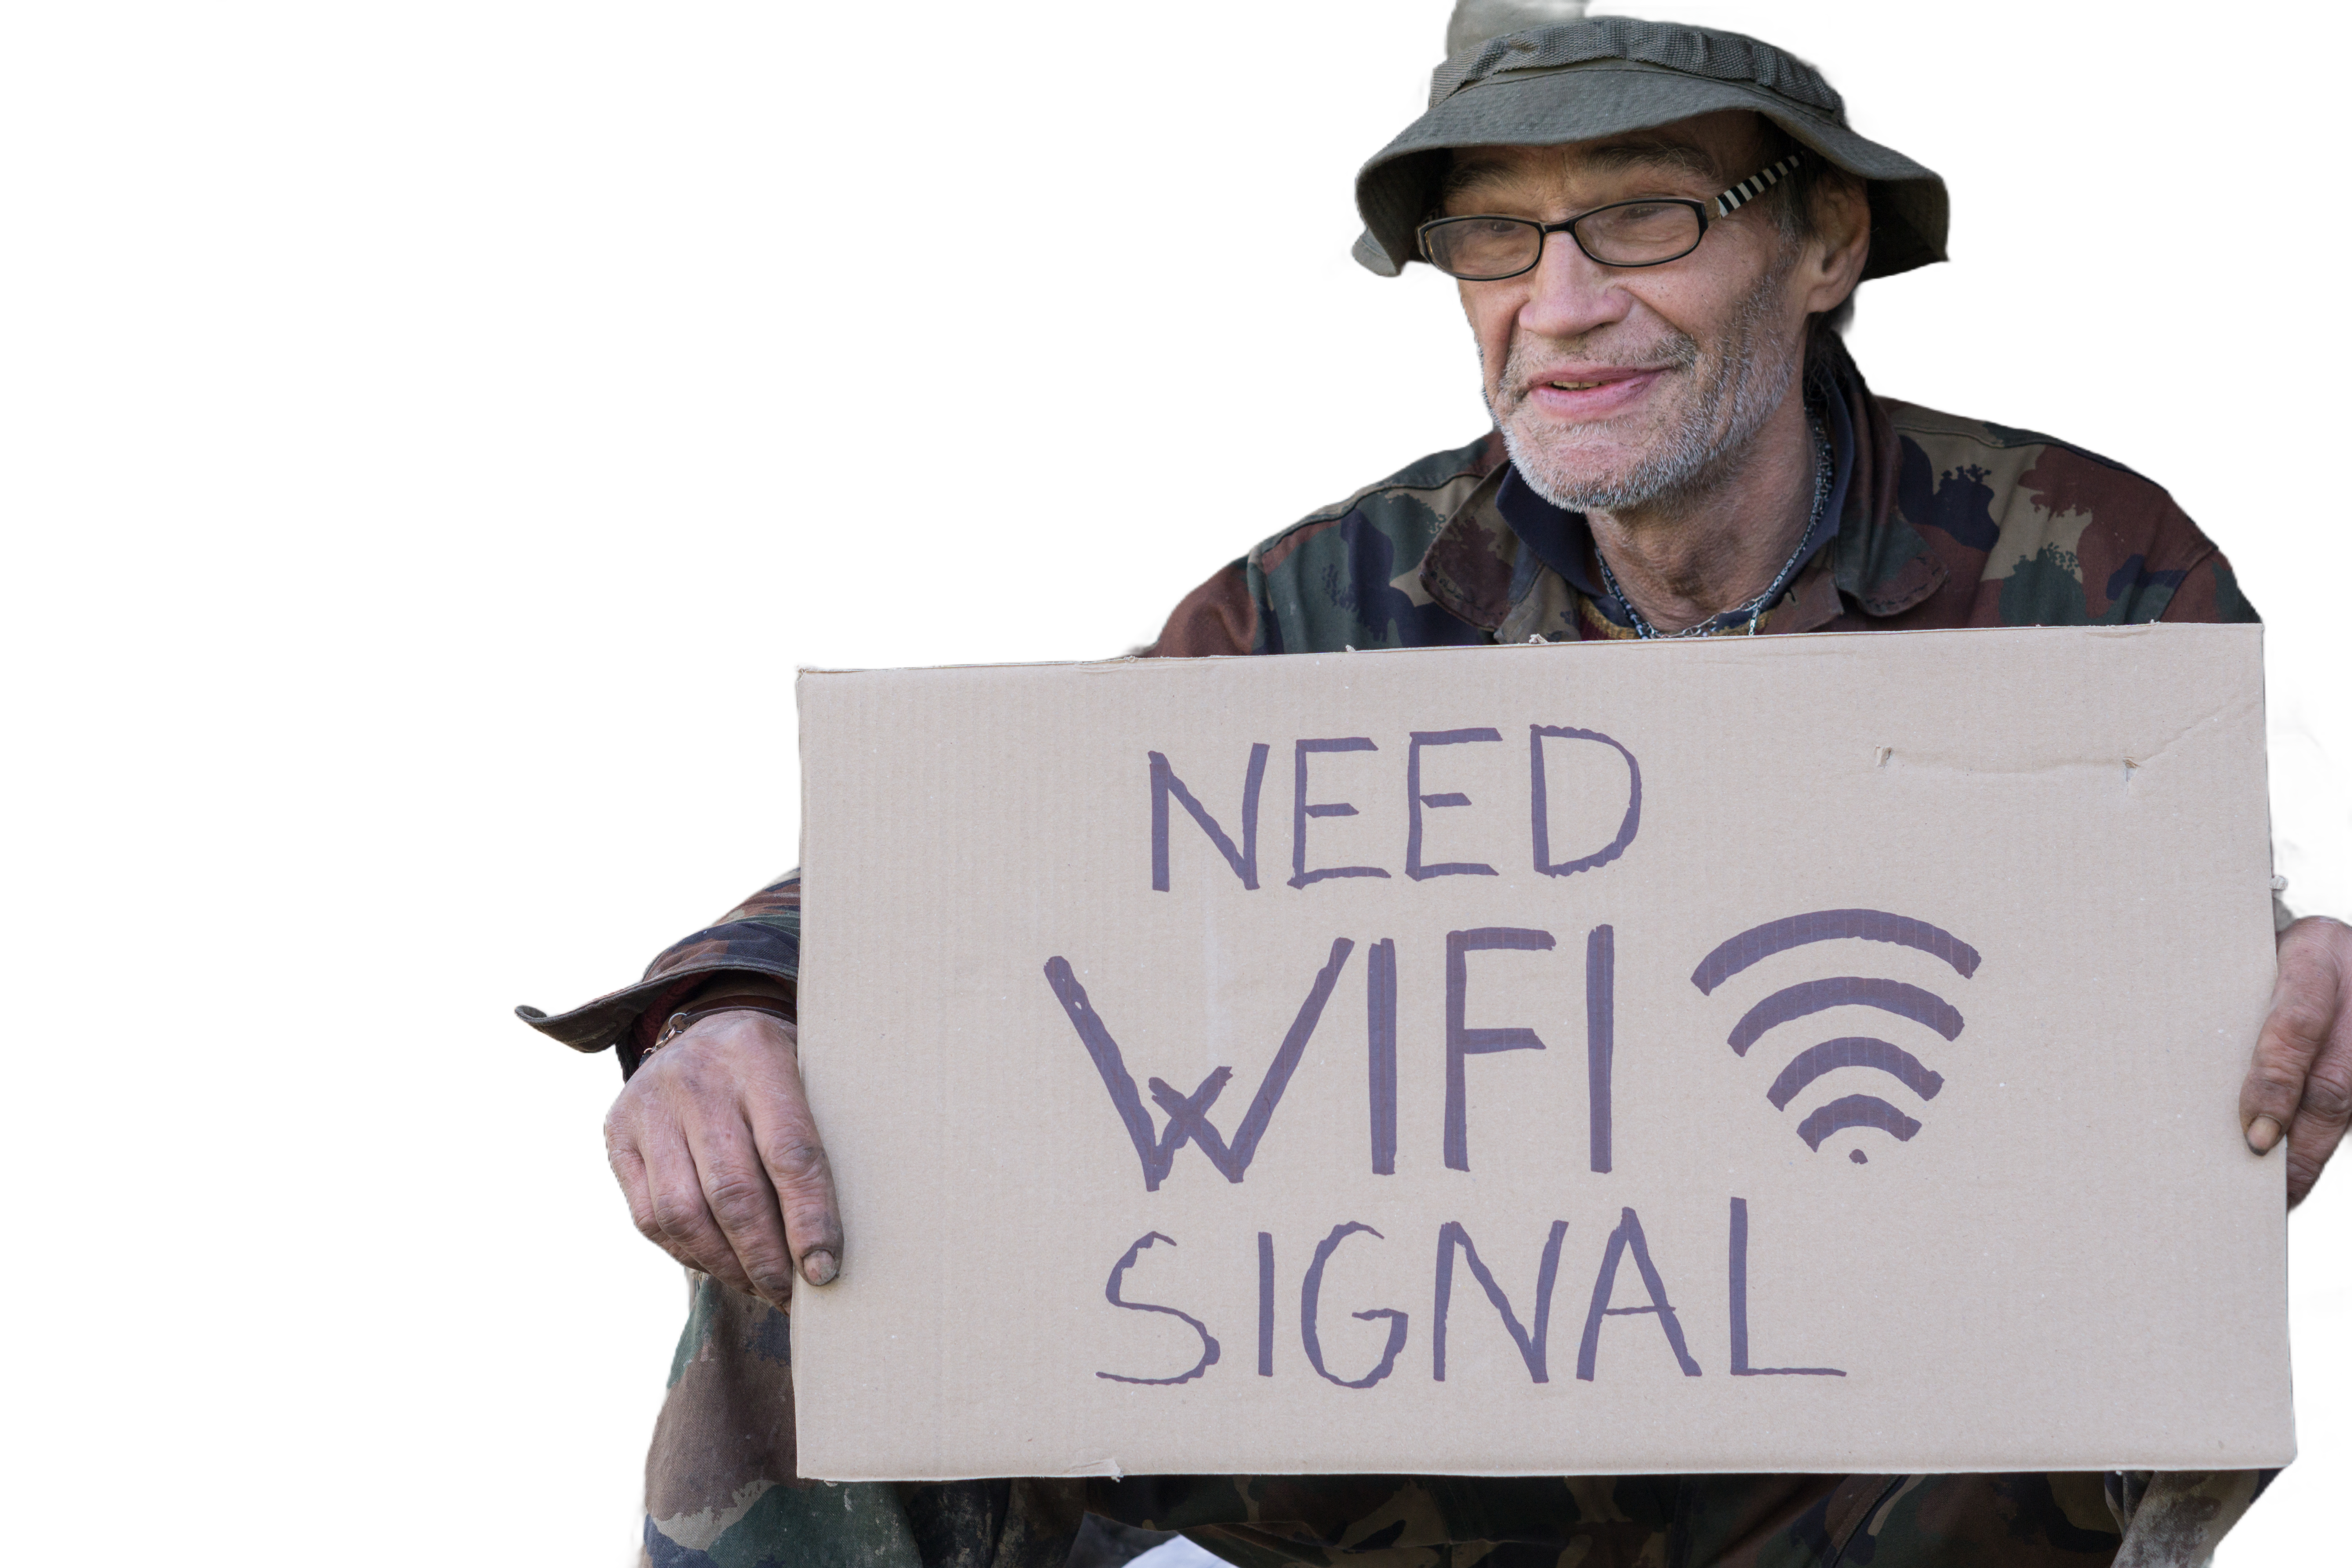 Wi-Fi for the Homeless